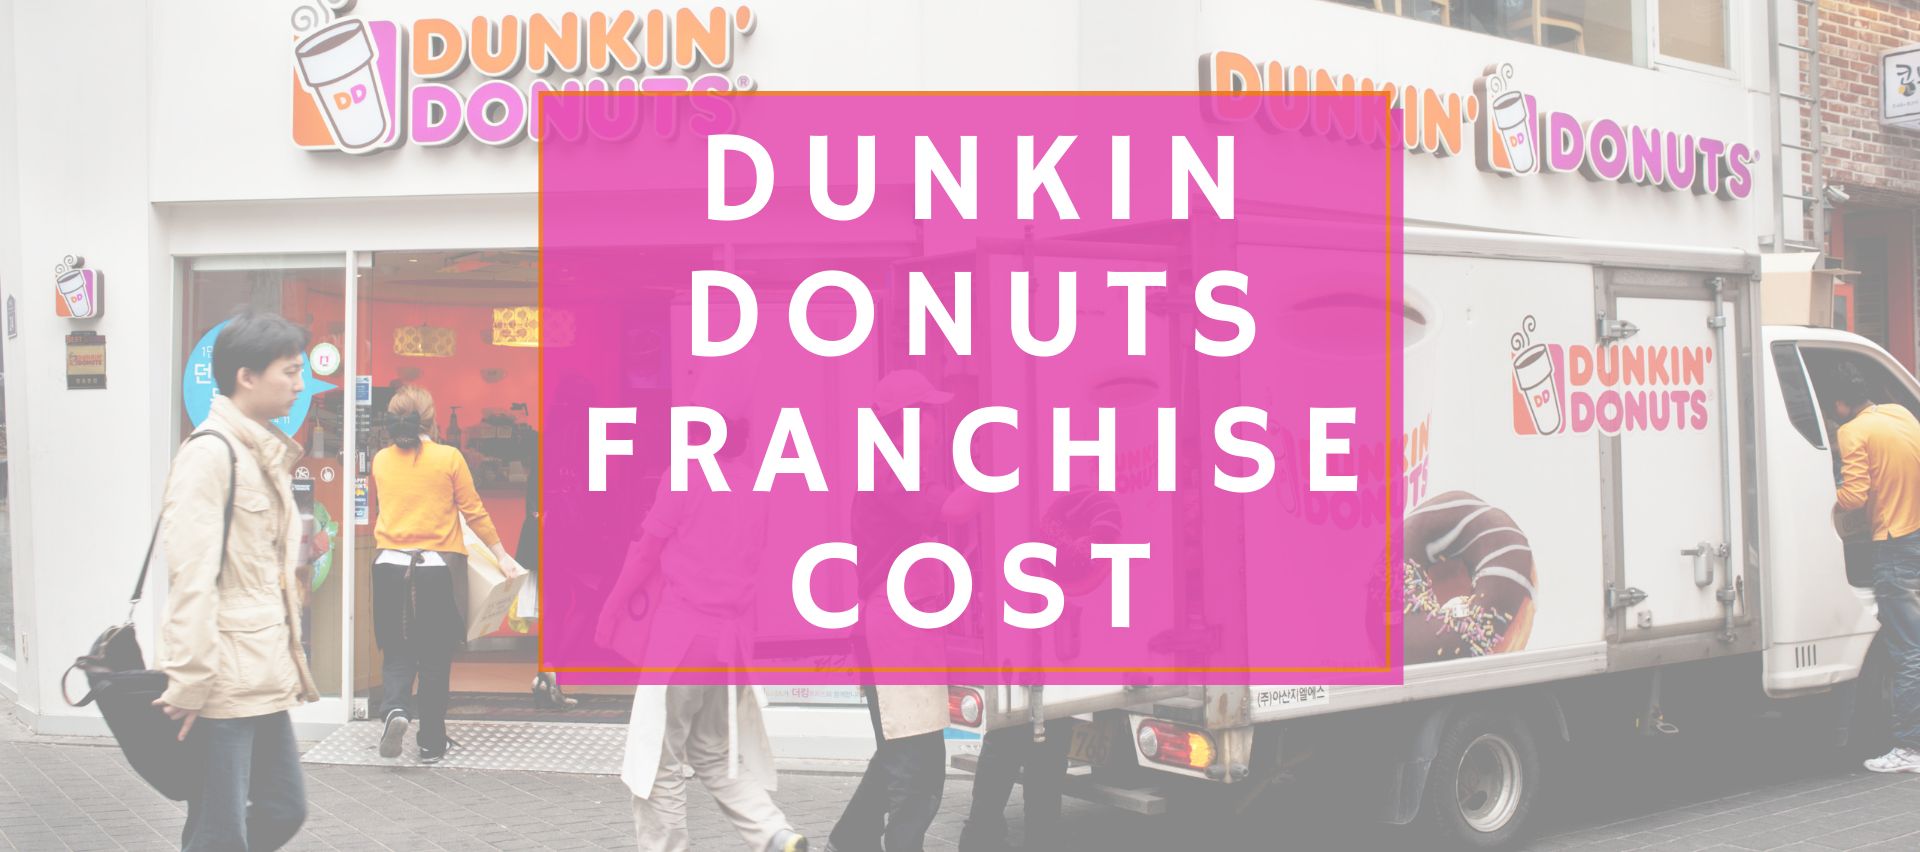 Dunkin-Donuts-Franchise-Cost.png